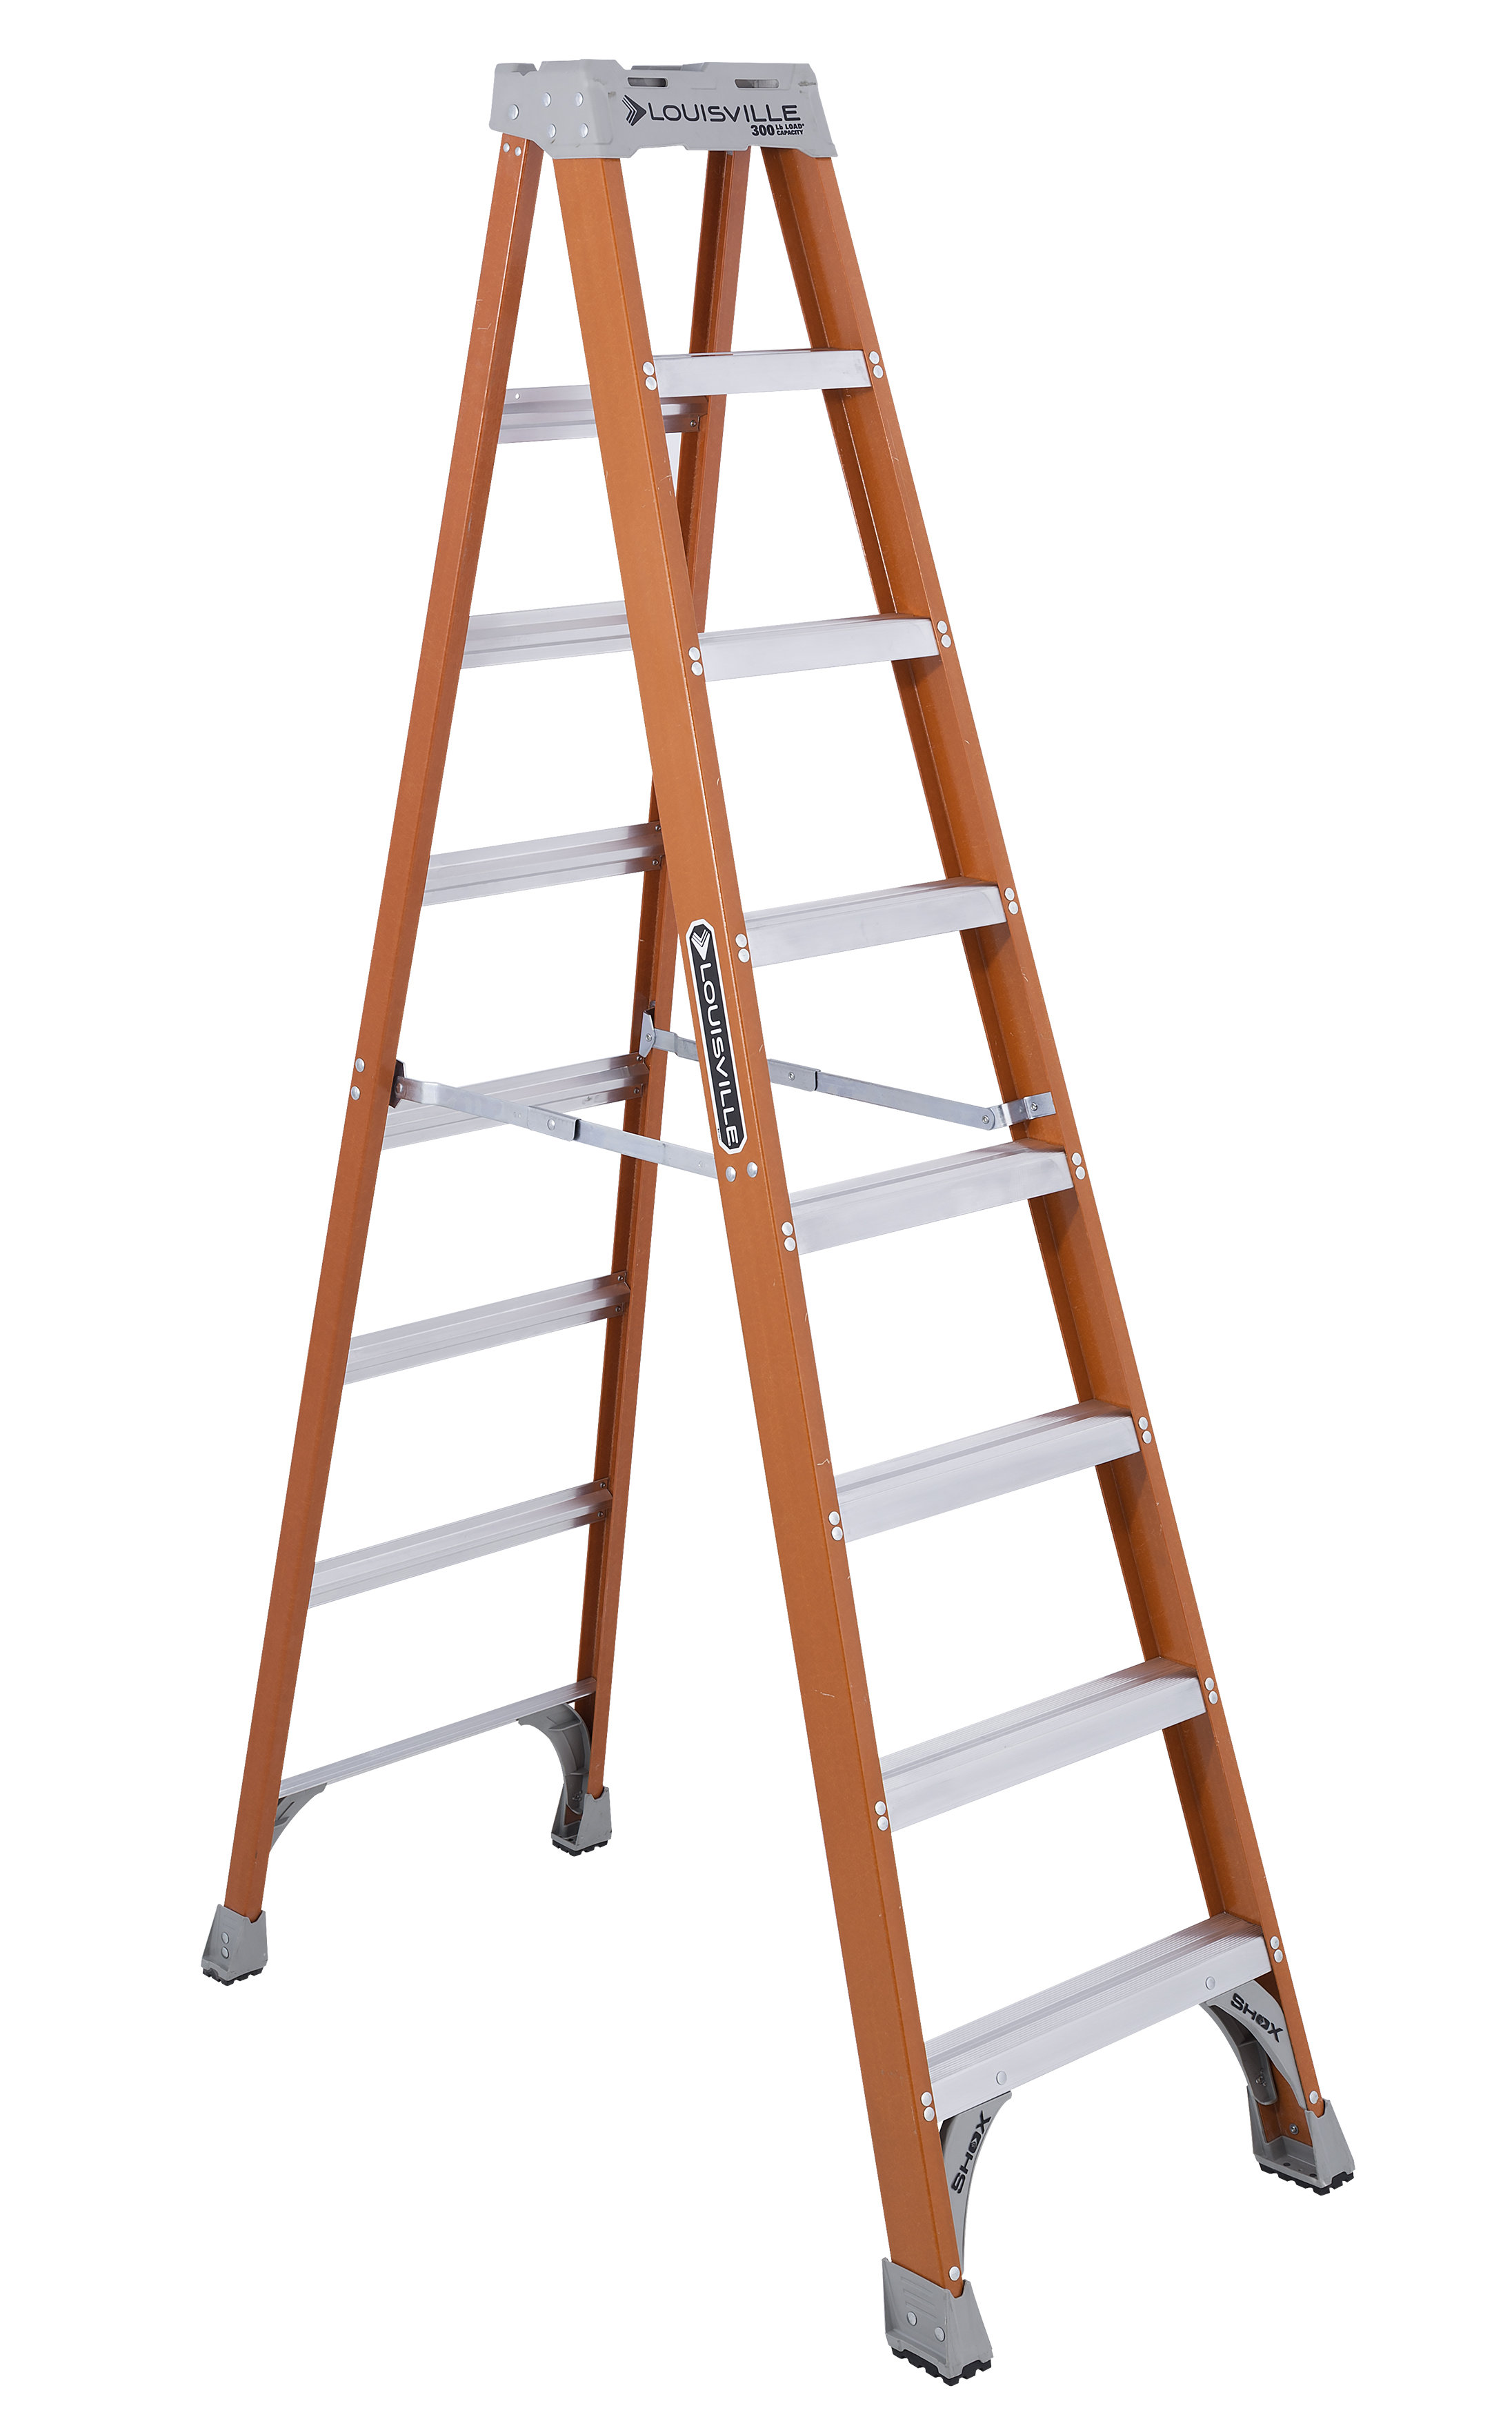 Louisville Commercial Aluminum Step Construction Tool Ladder 250 LB Capacity 